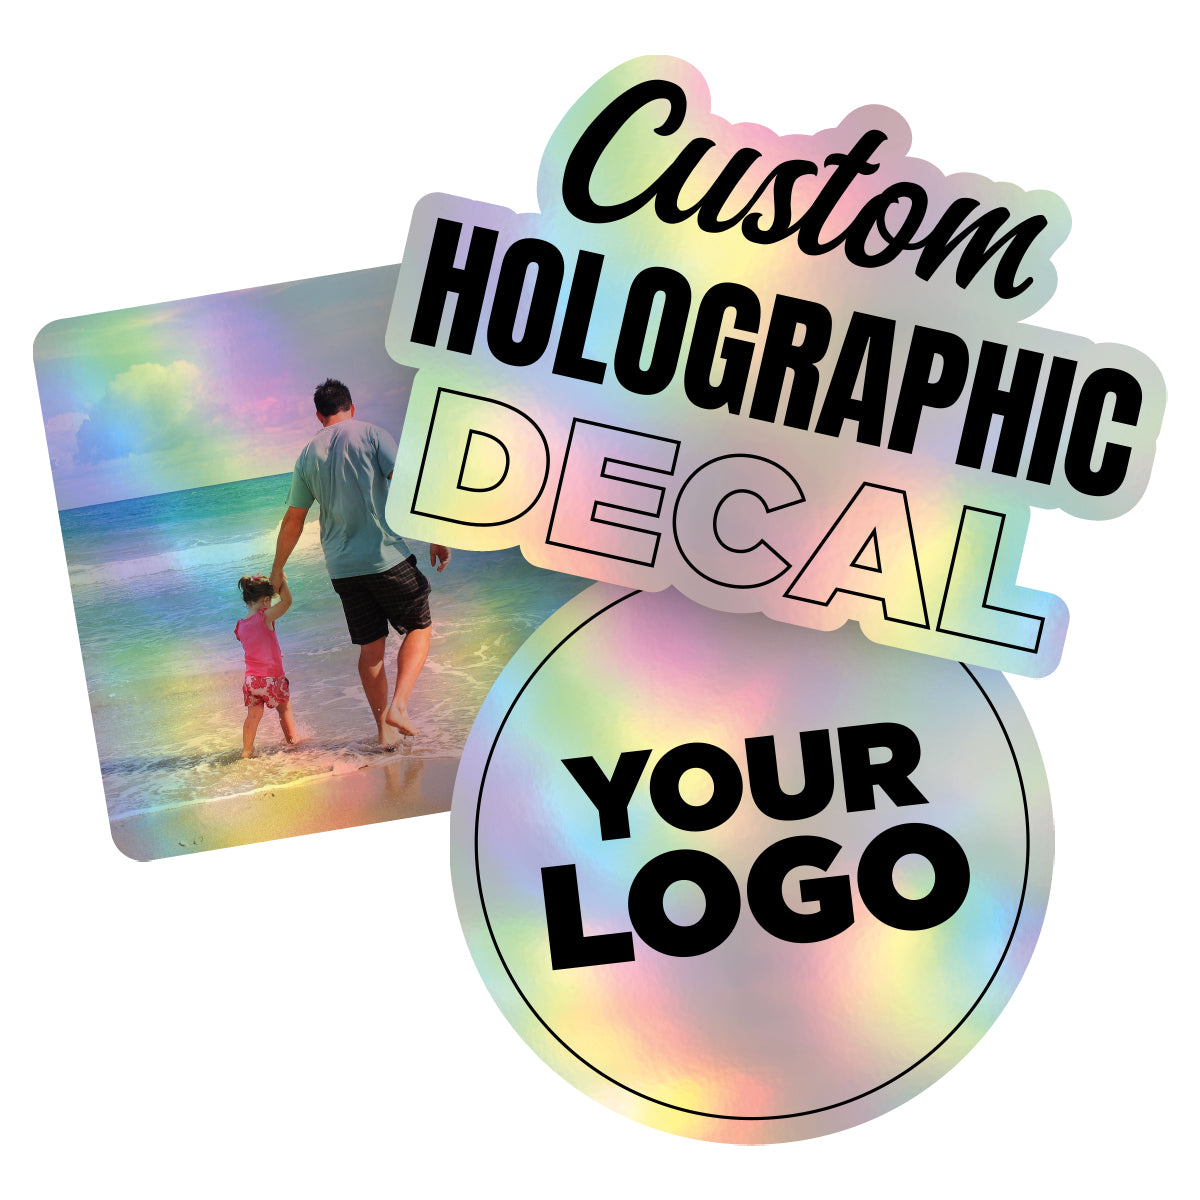 Personalized Holographic Vinyl Sticker Decal Custom Made Any Logo, Image, Text, Or Name Die Cut To Shape - 50 Pack, 8 Inch, Square